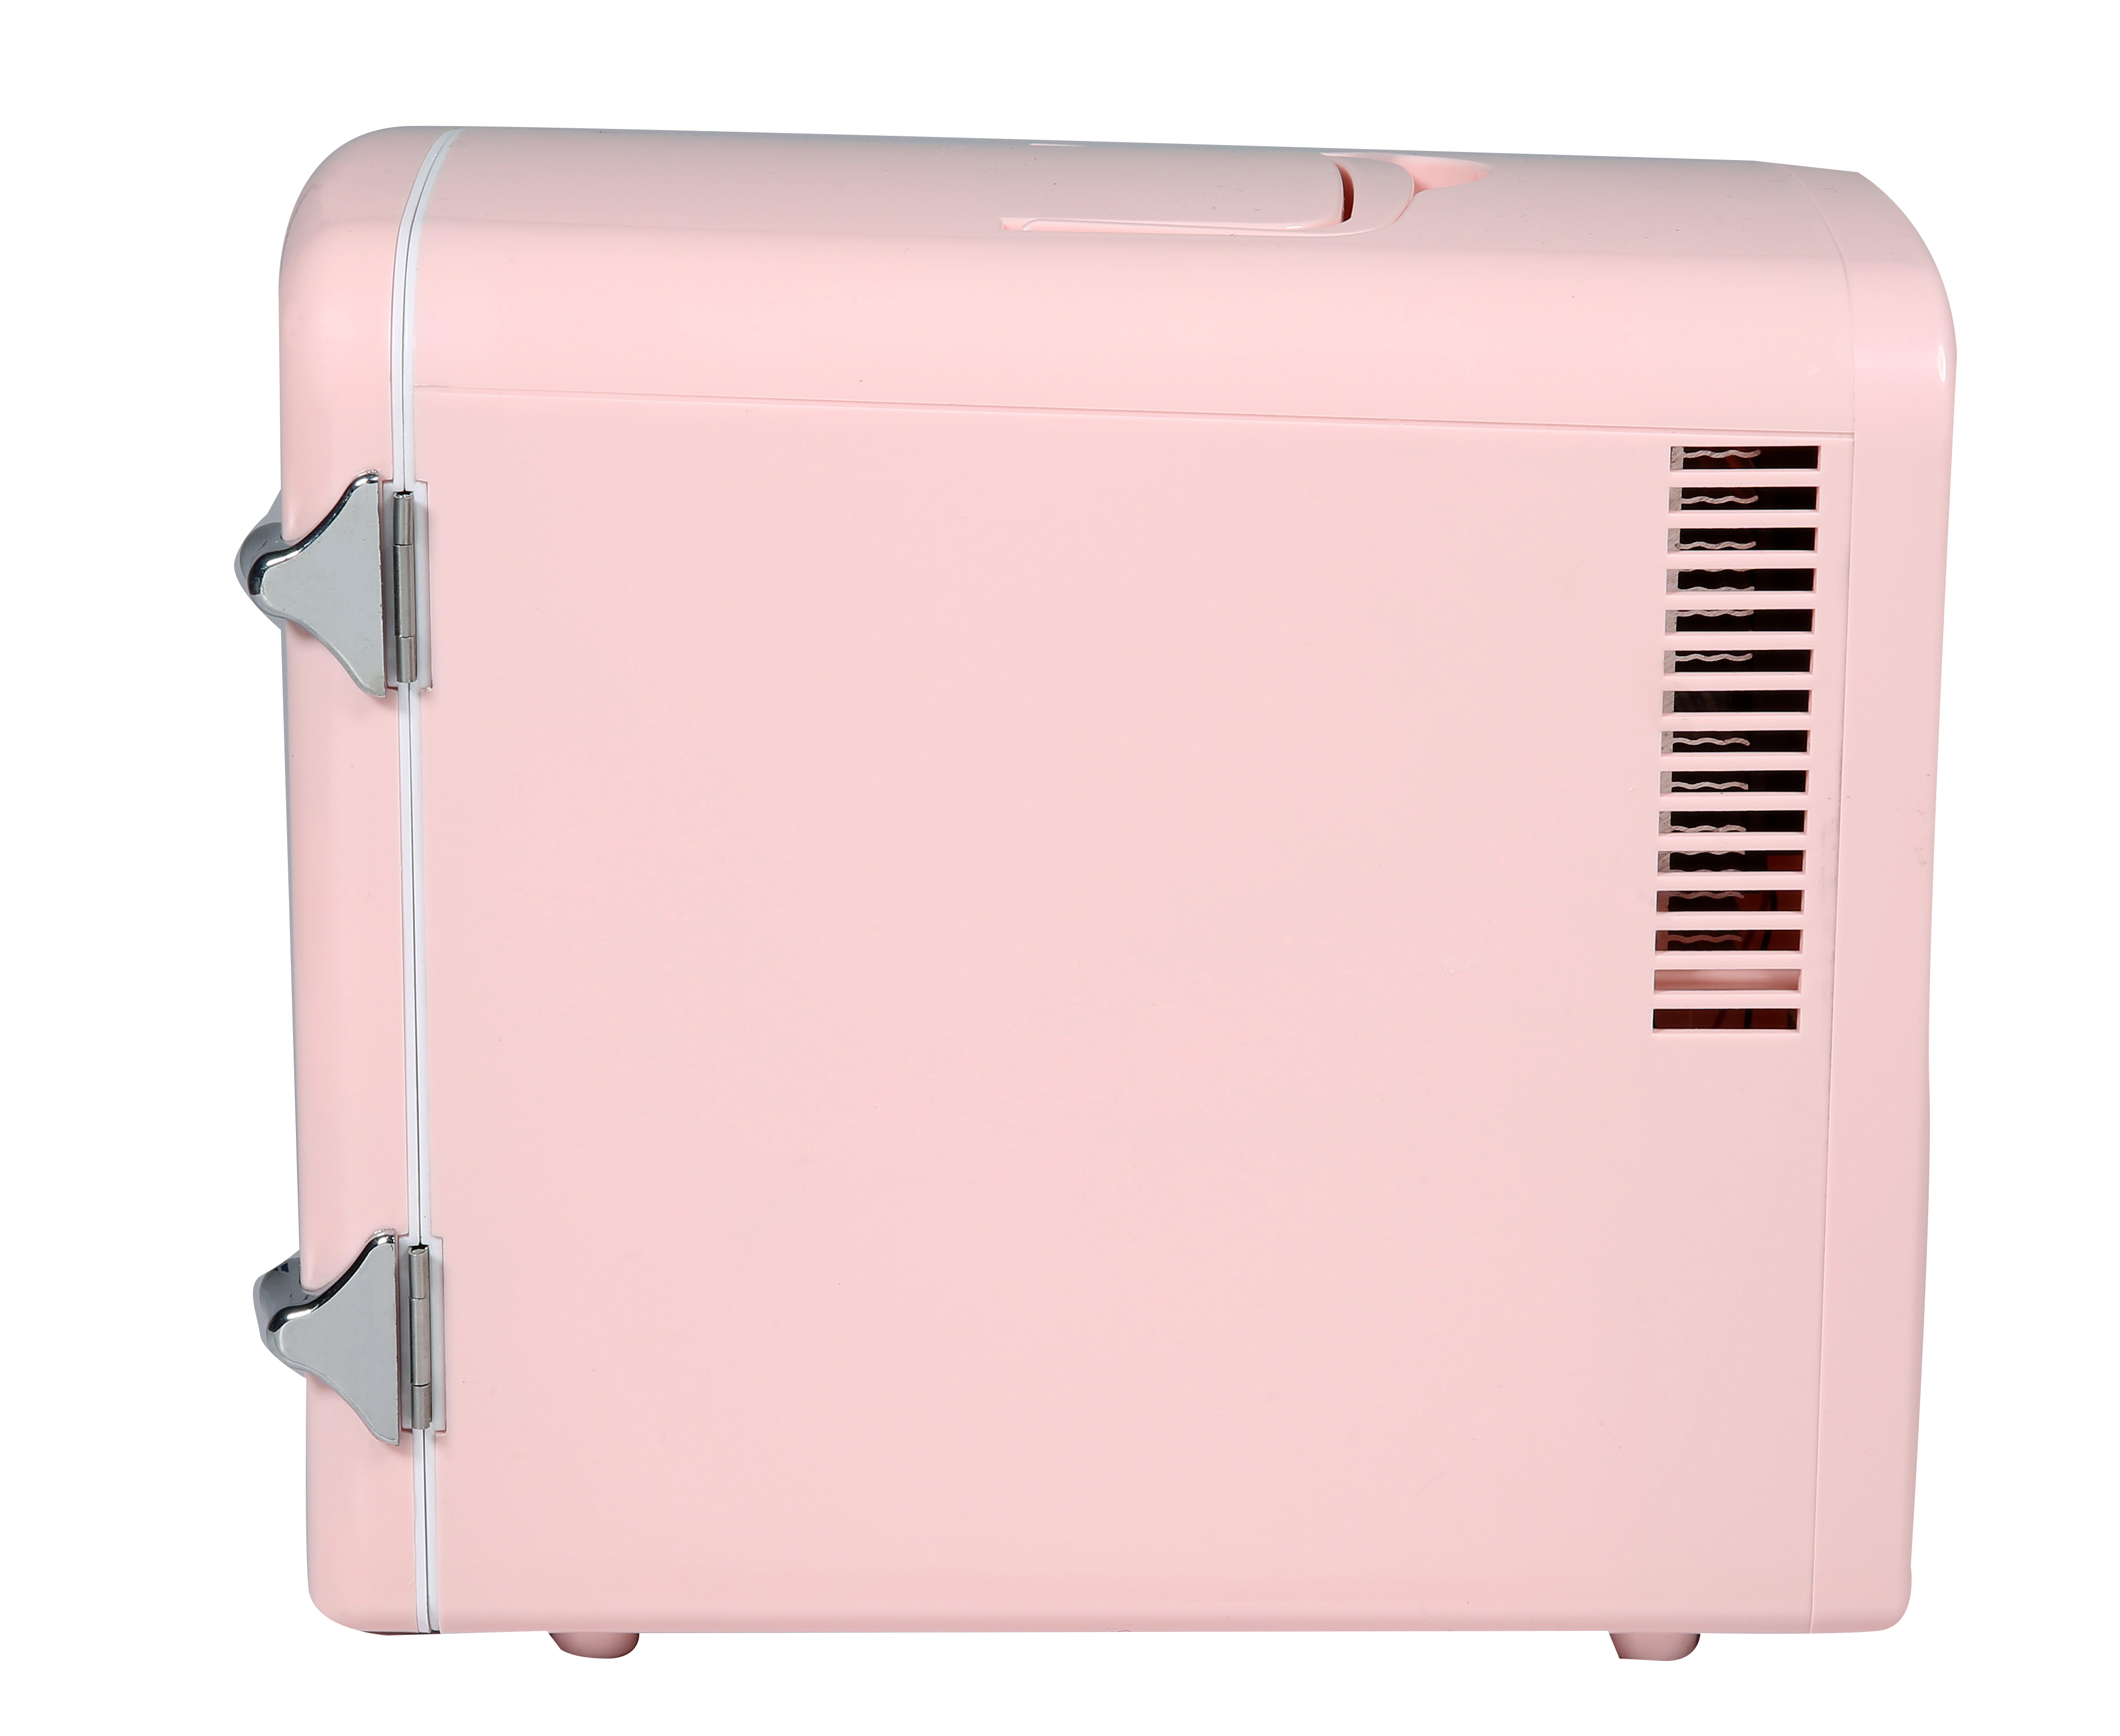 Frigidaire Portable Retro Extra Large 9-Can Capacity Mini Cooler, EFMIS175, Pink - image 10 of 10